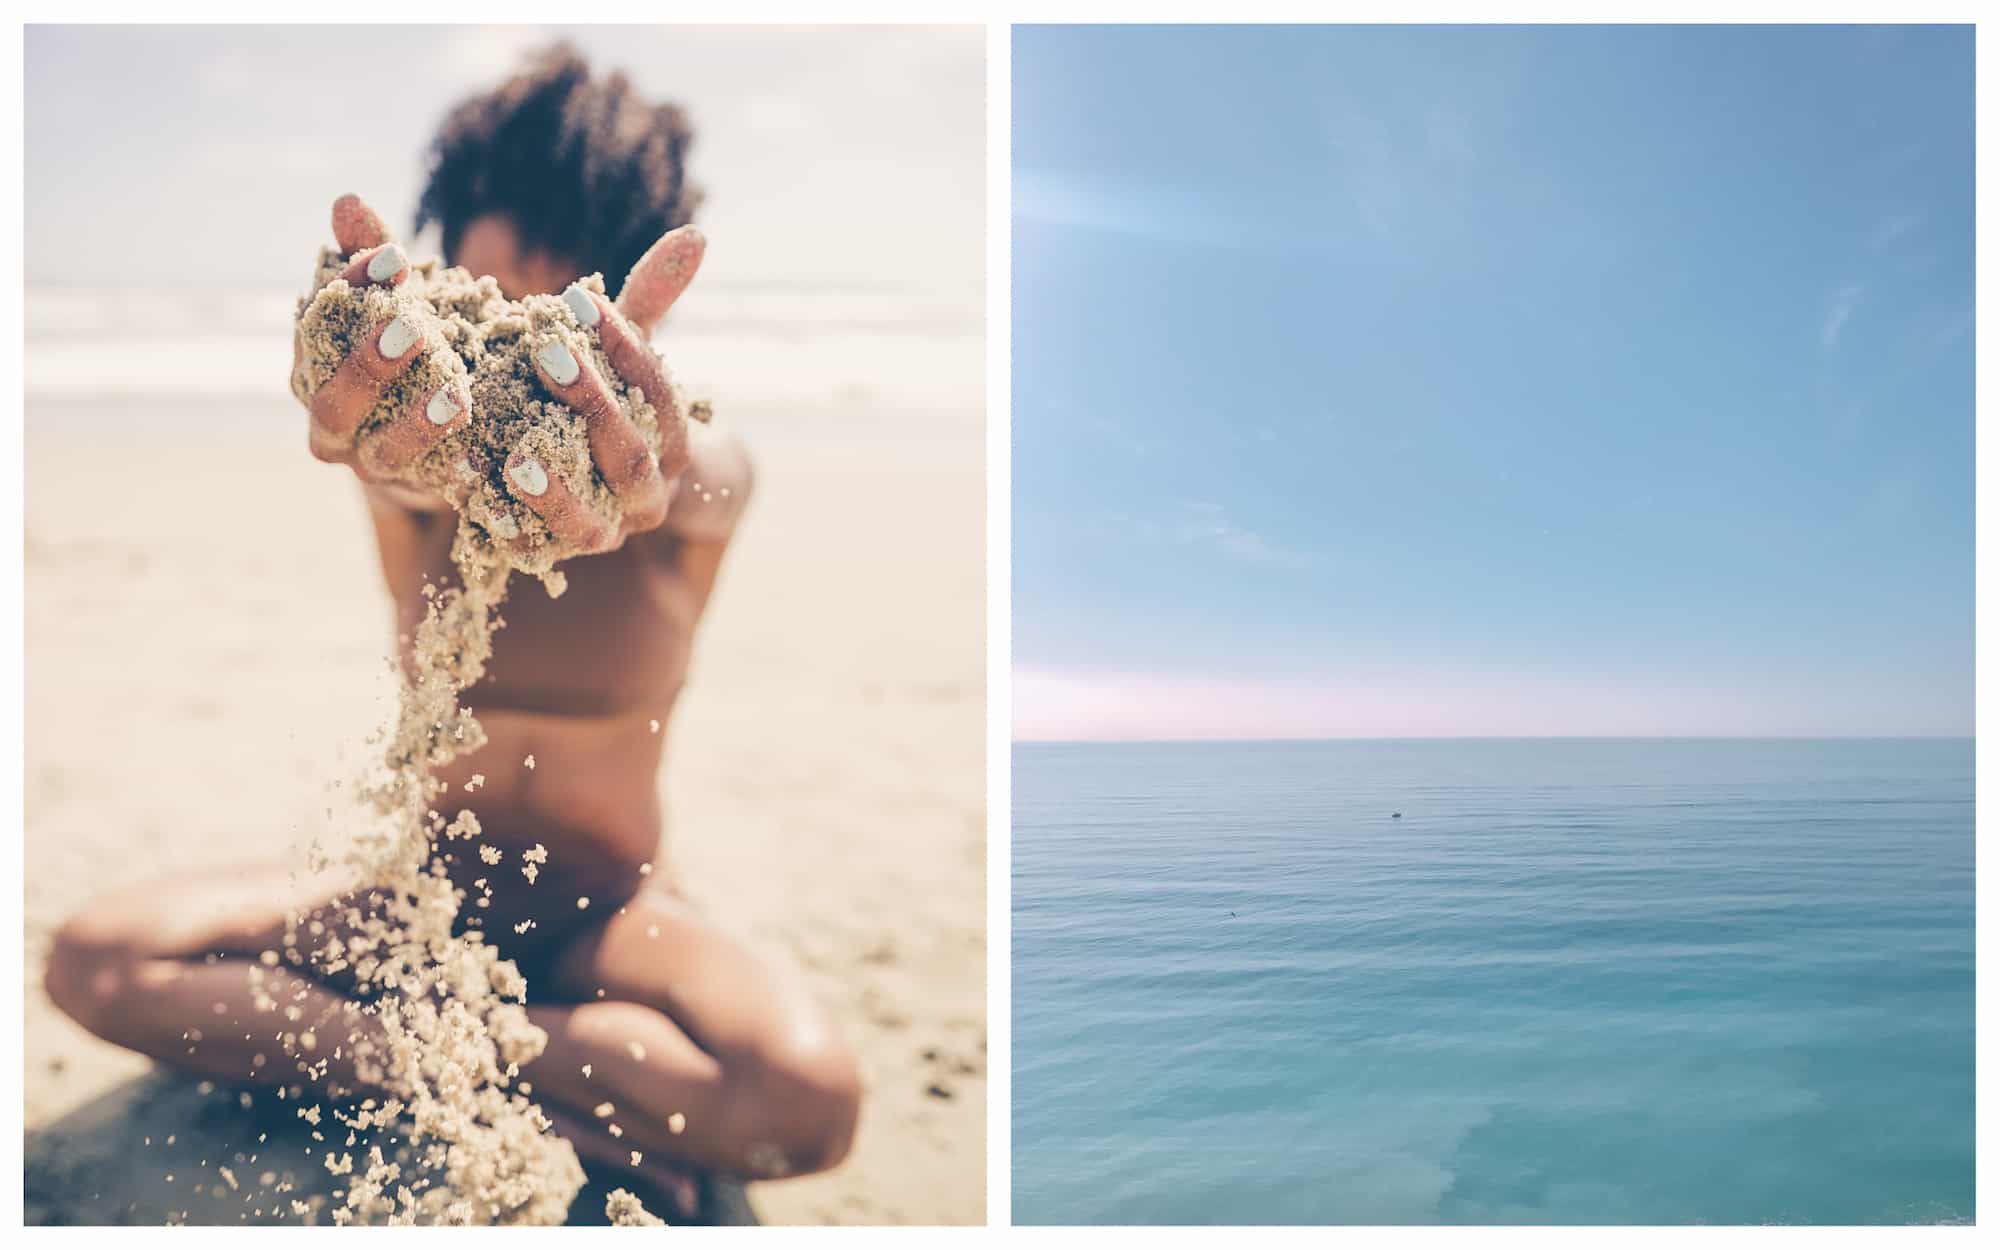 A woman sitting on a beach in a bikini, letting sand fall through her fingers (left). The blue waters of the ocean and the early morning sky before sunrise (right).